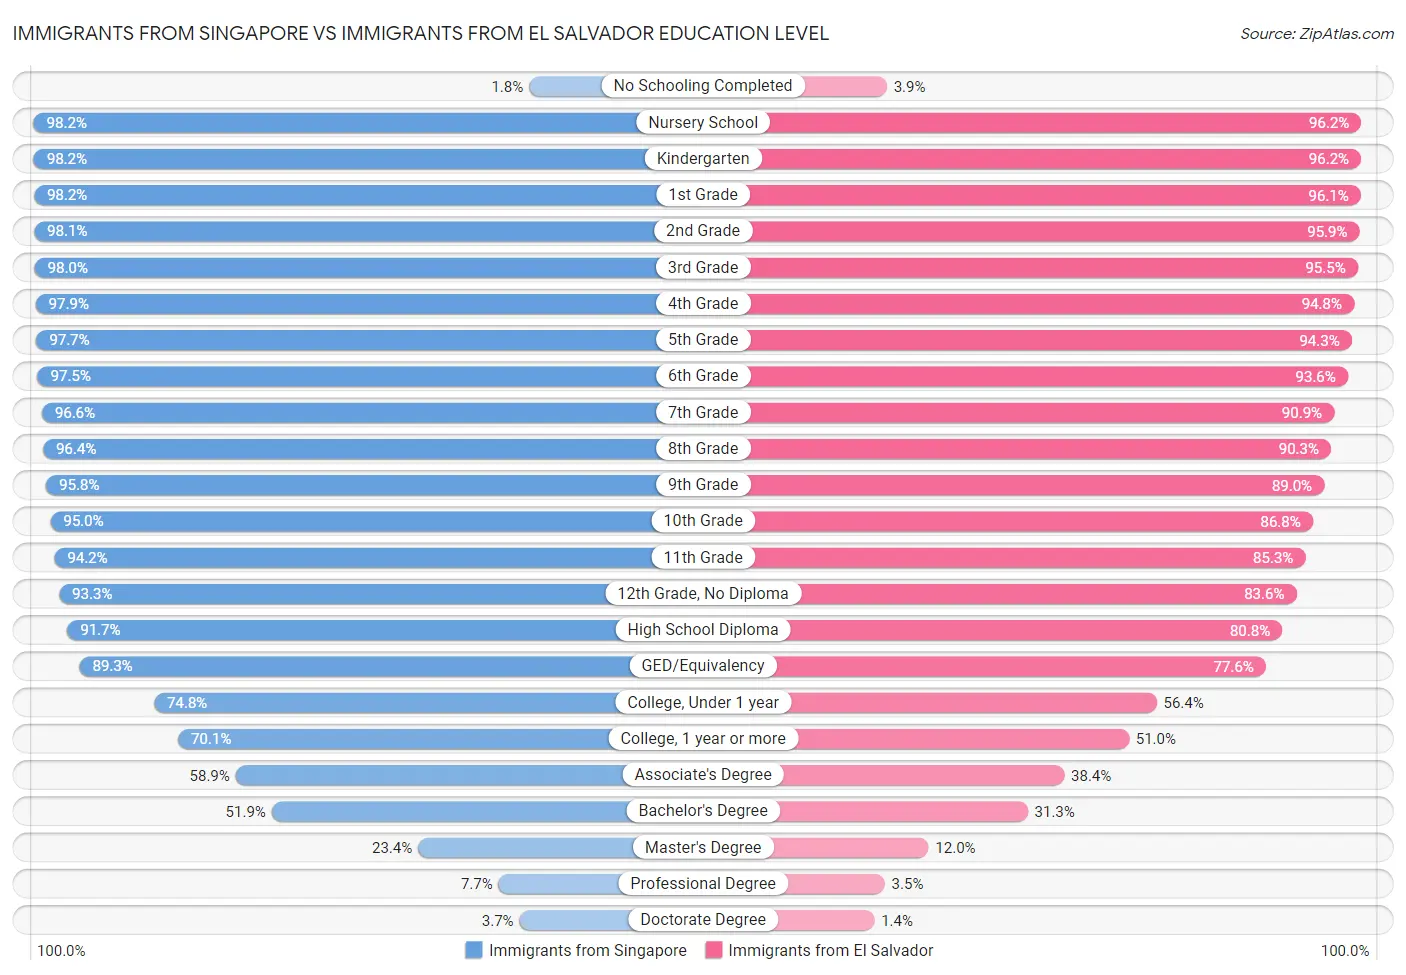 Immigrants from Singapore vs Immigrants from El Salvador Education Level